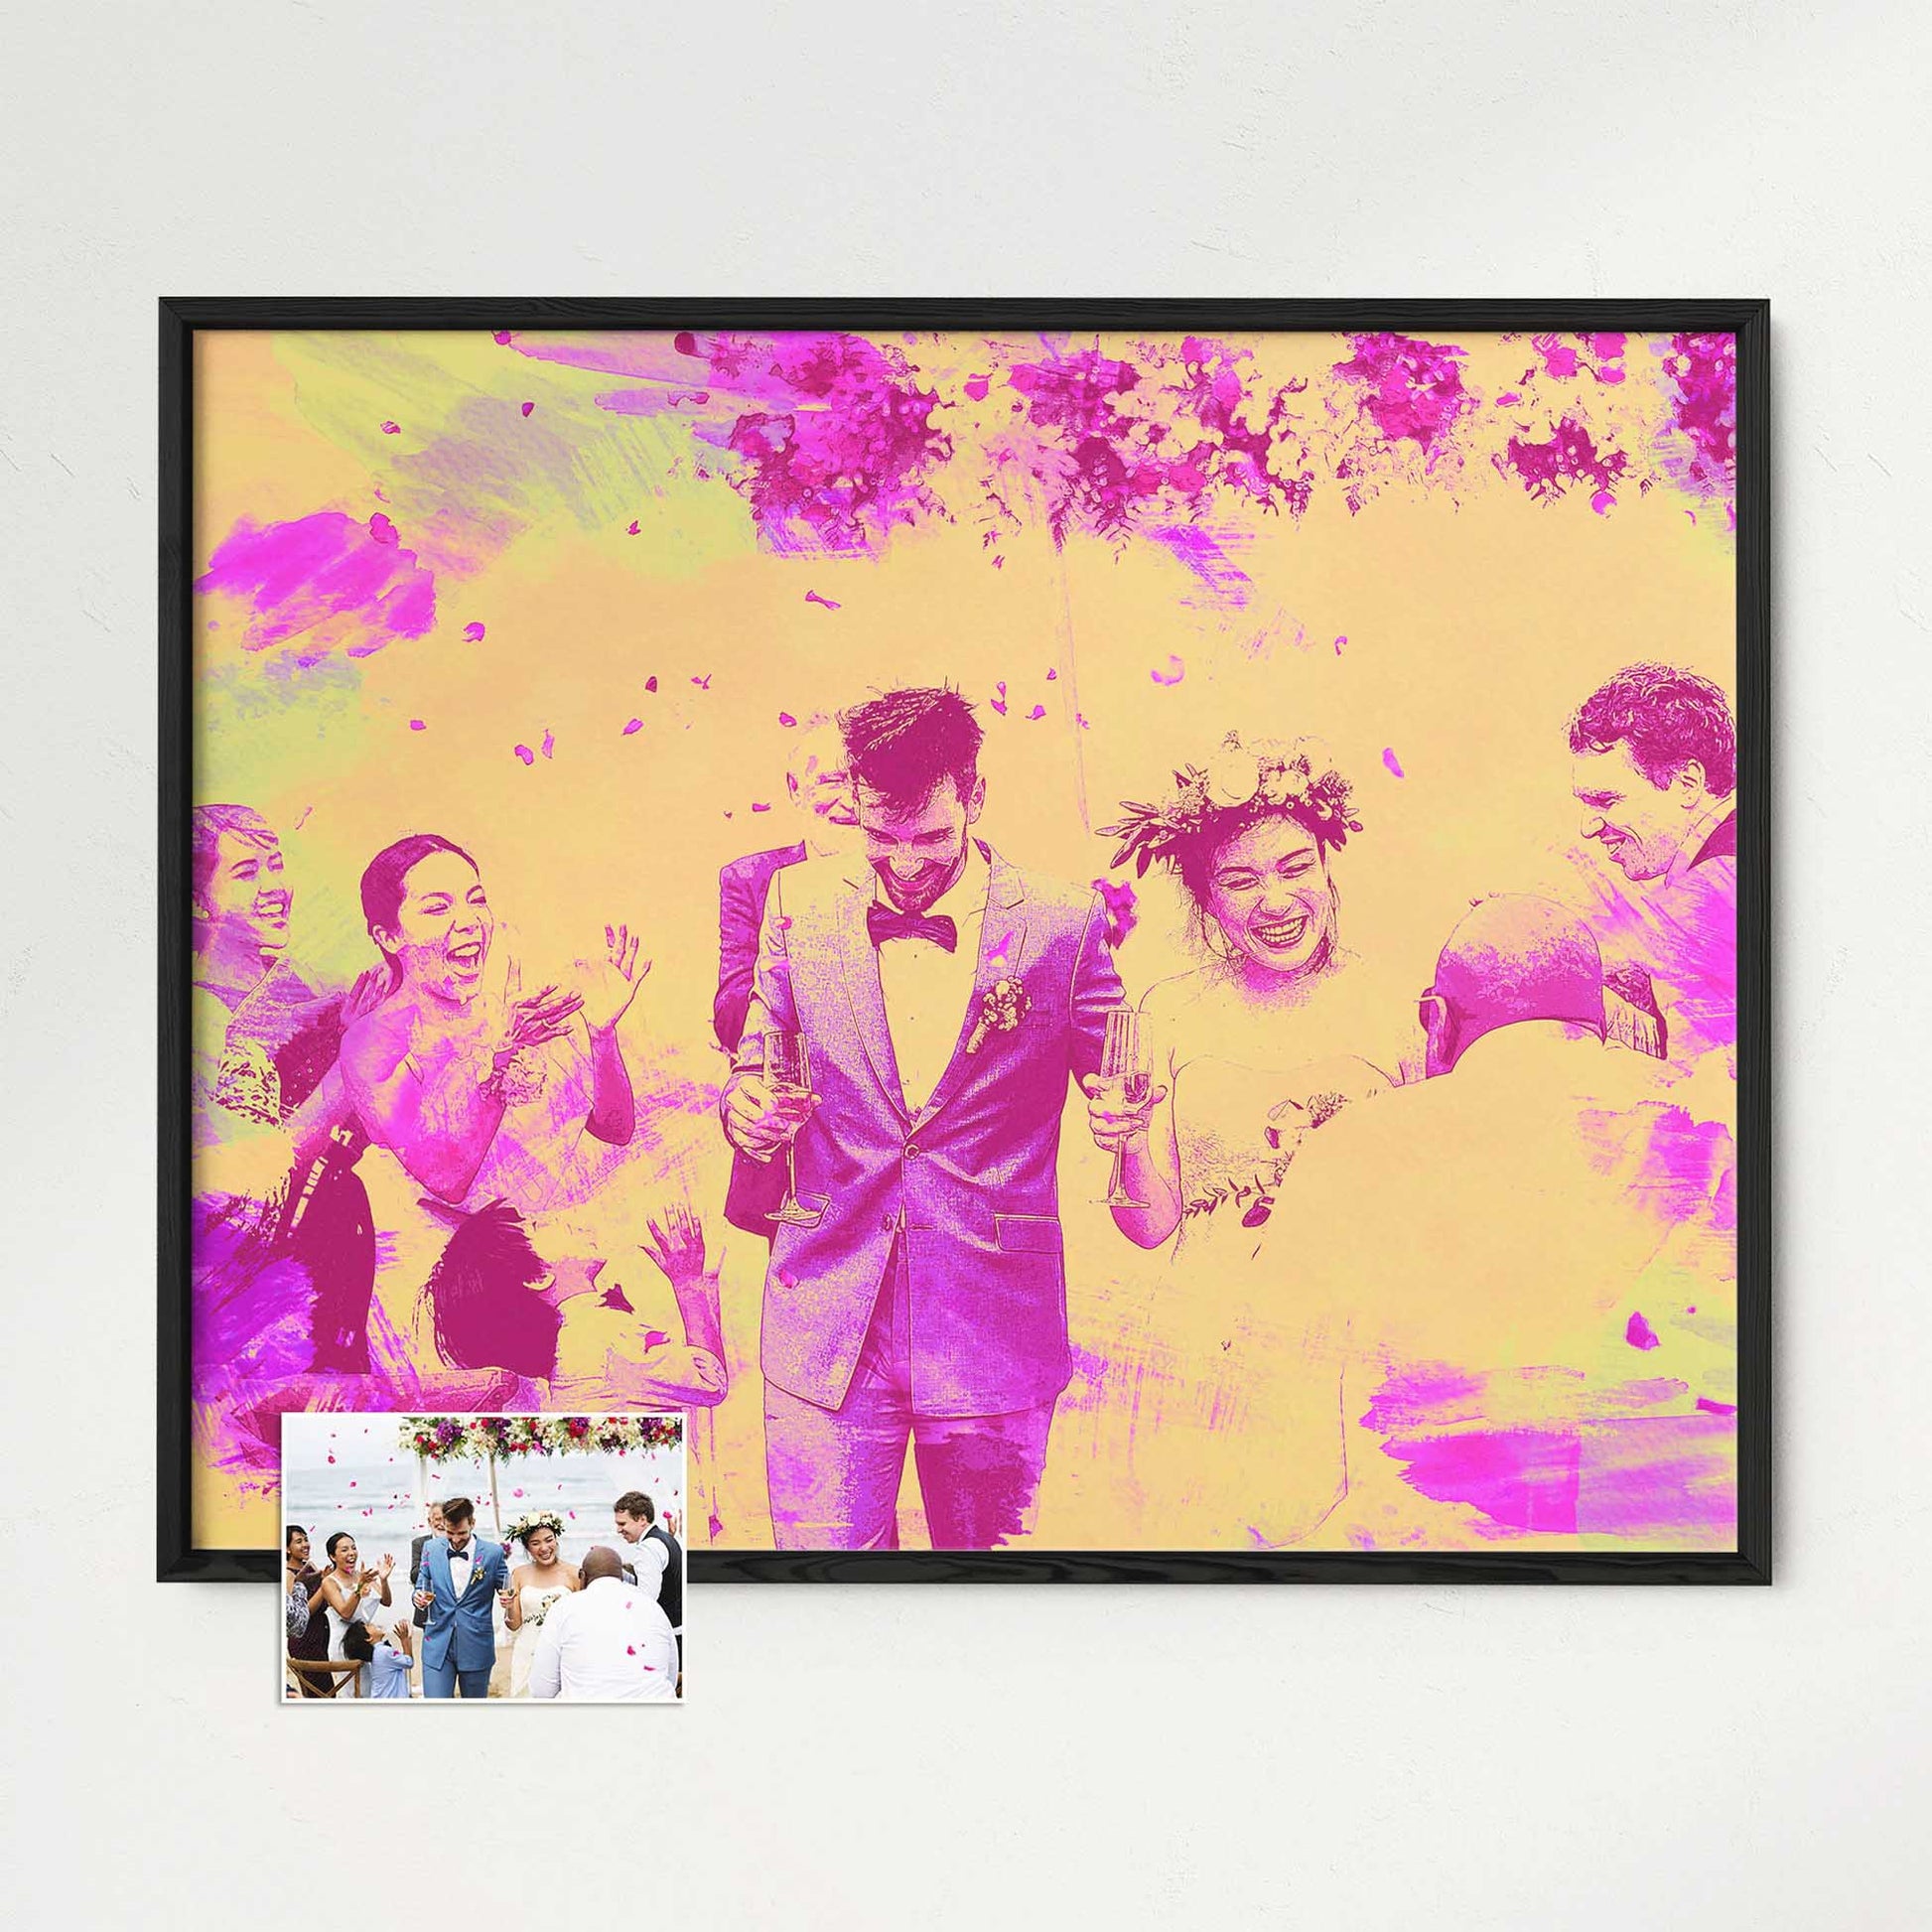 Immerse yourself in the world of art with our Personalised Pink & Yellow Watercolor Framed Print. This vibrant and vivid painting, created from a photo, embodies the essence of cool and colorful hues, gallery-quality print